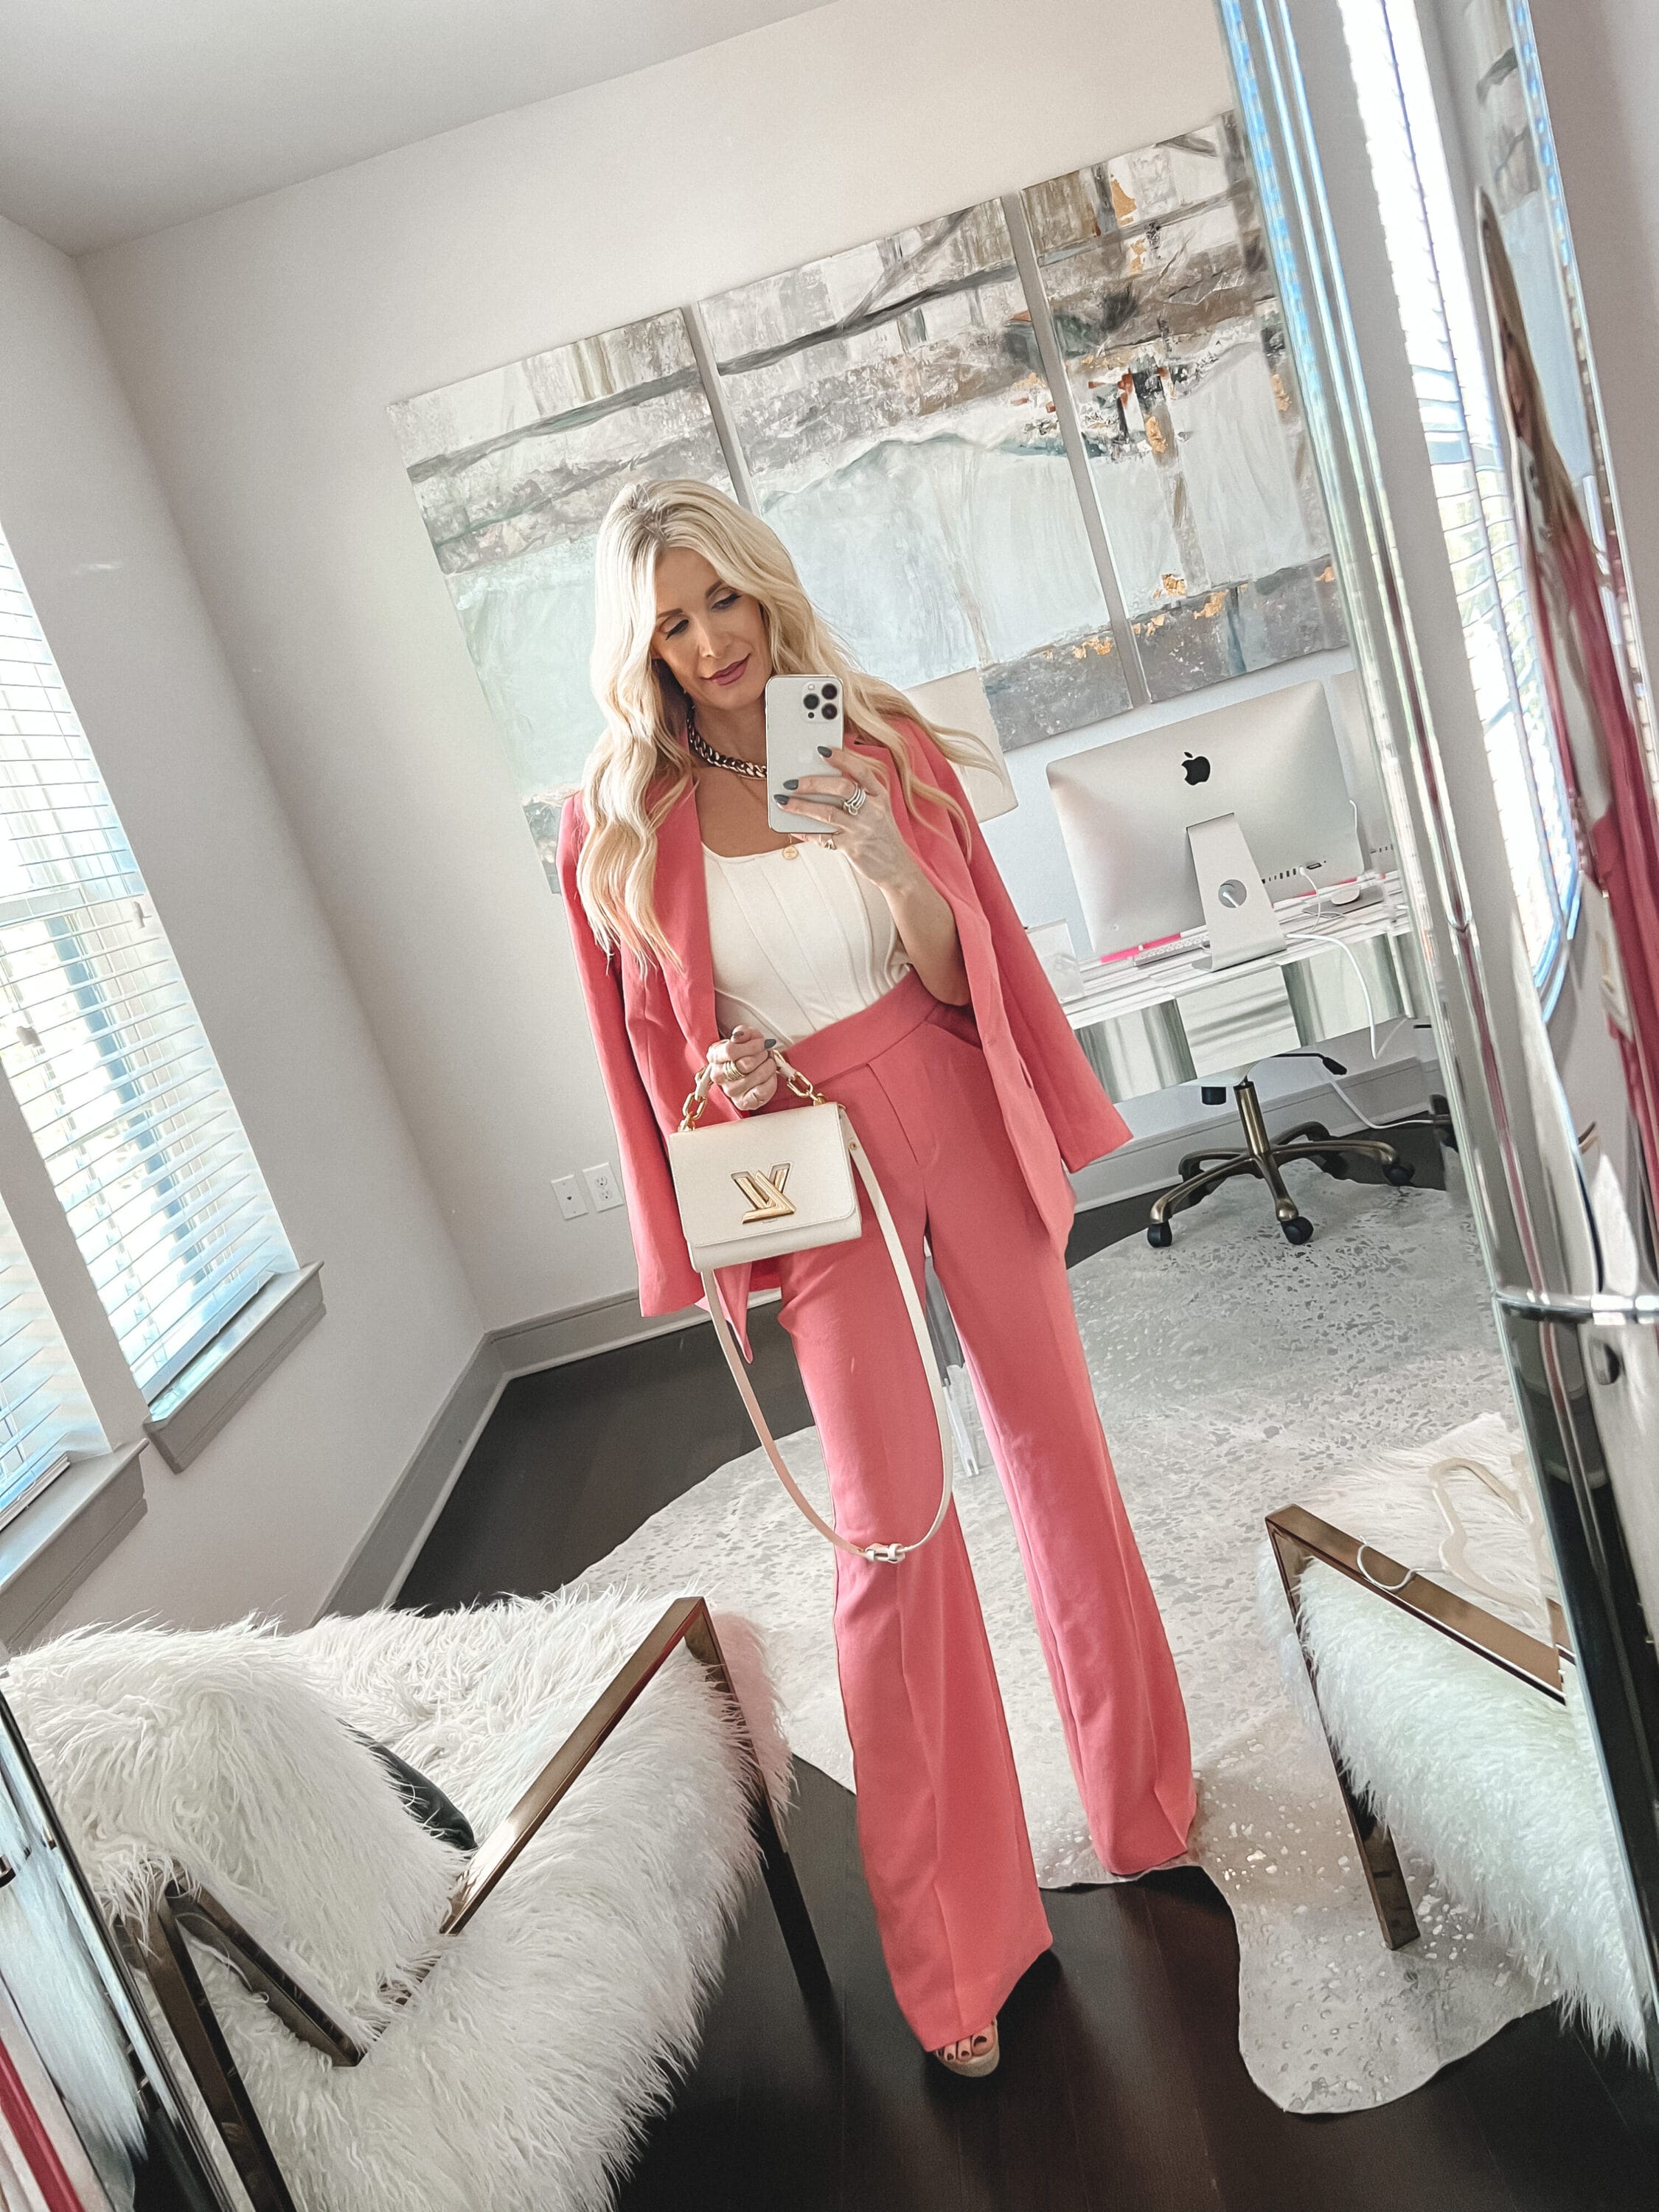 Over 40 fashion blogger from Dallas wearing pink twill blazer and matching pants from Express as one of 5 Galentine's Day Outfits.